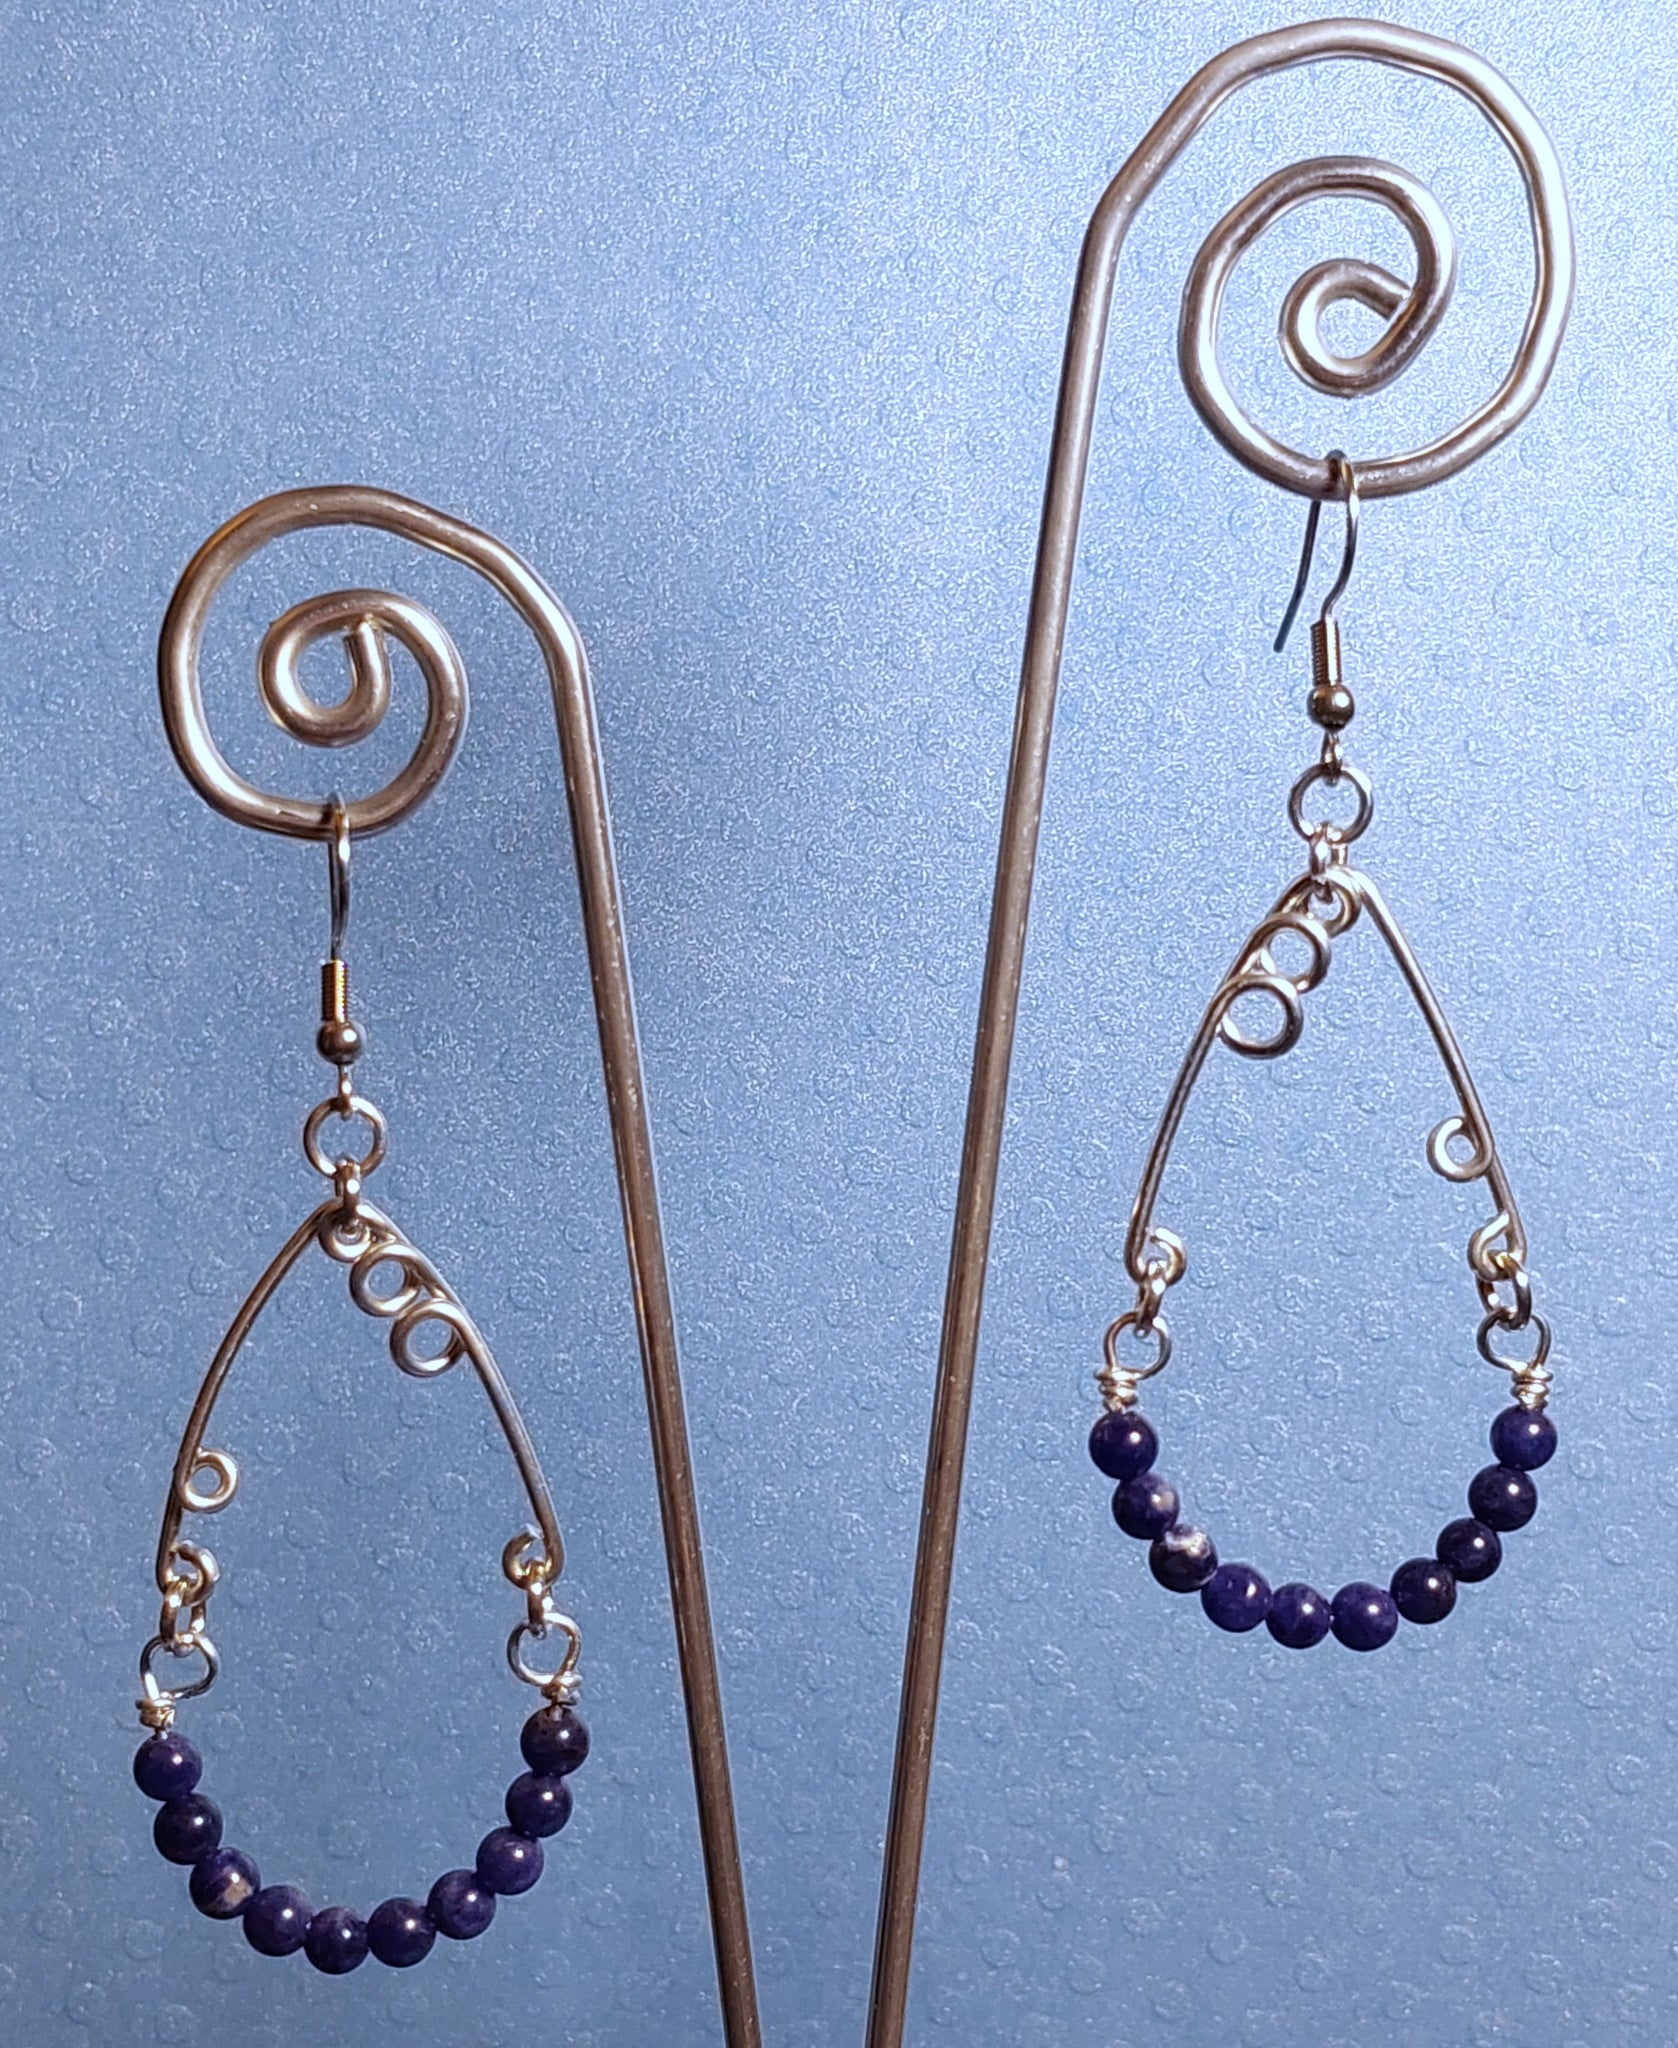 Handcrafted Aluminum Wire Earrings with Lapis Beads